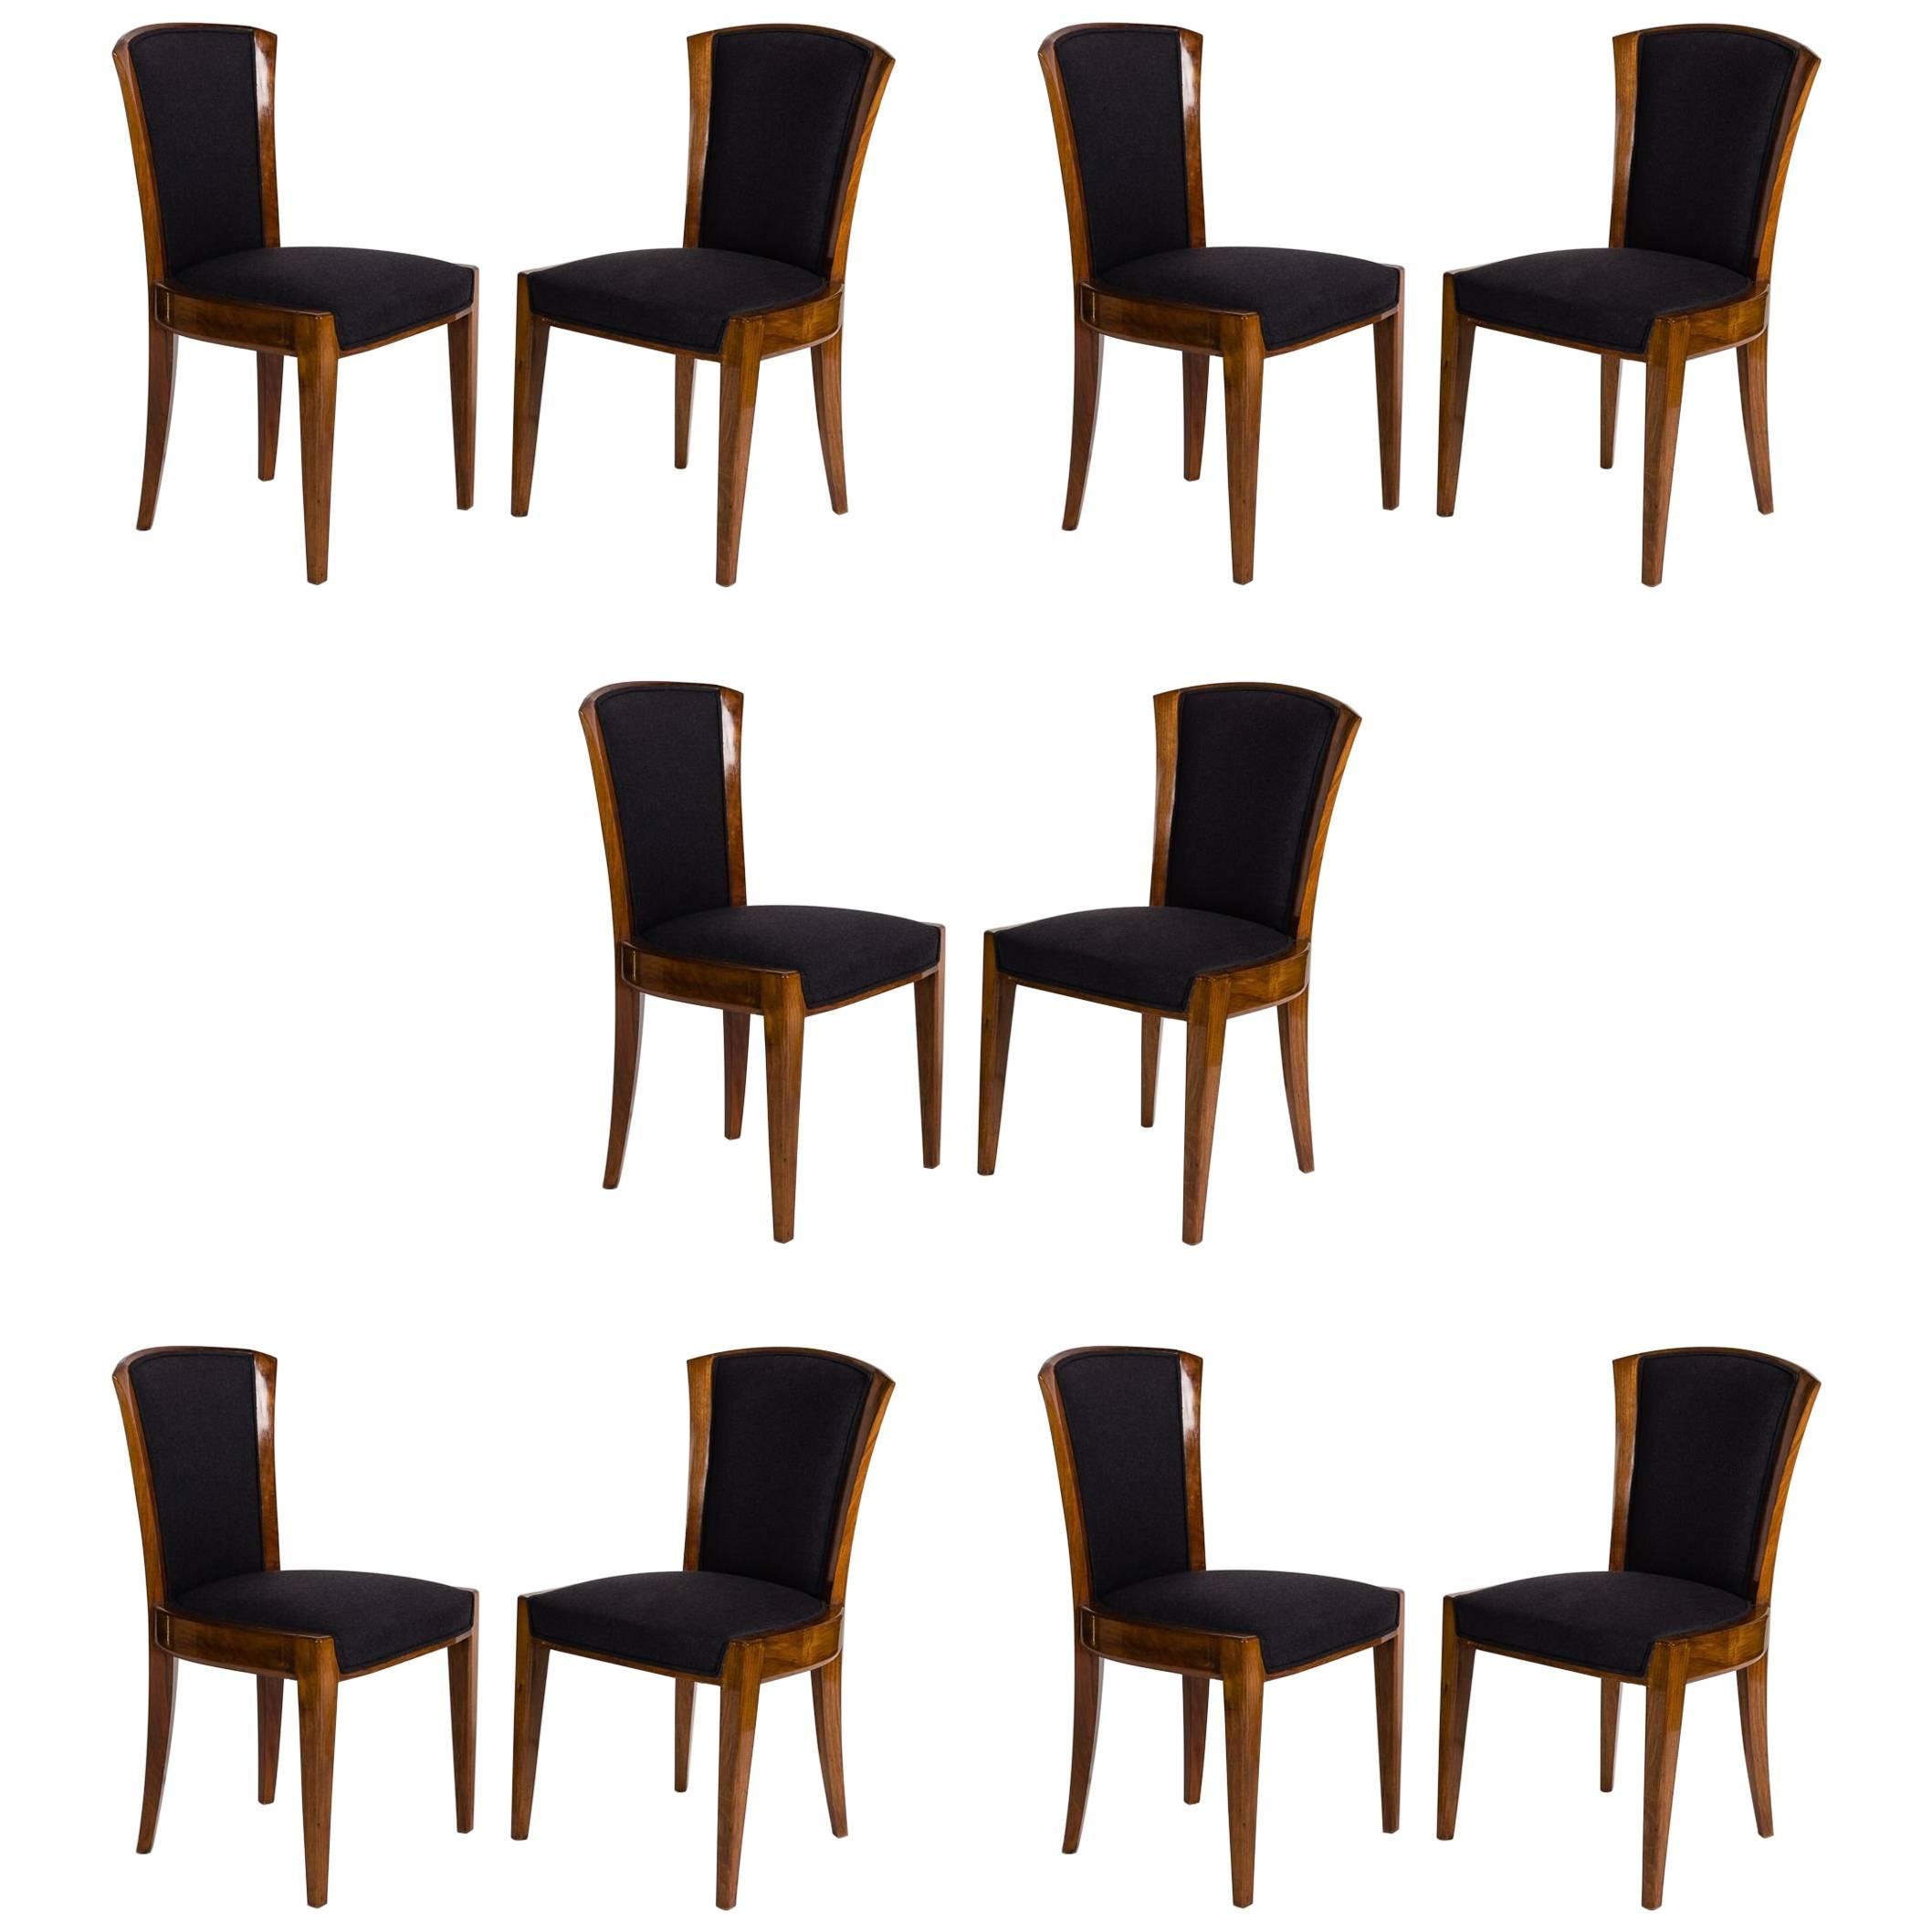 Dominique, Set of Ten Dining Chairs, France, C. 1928